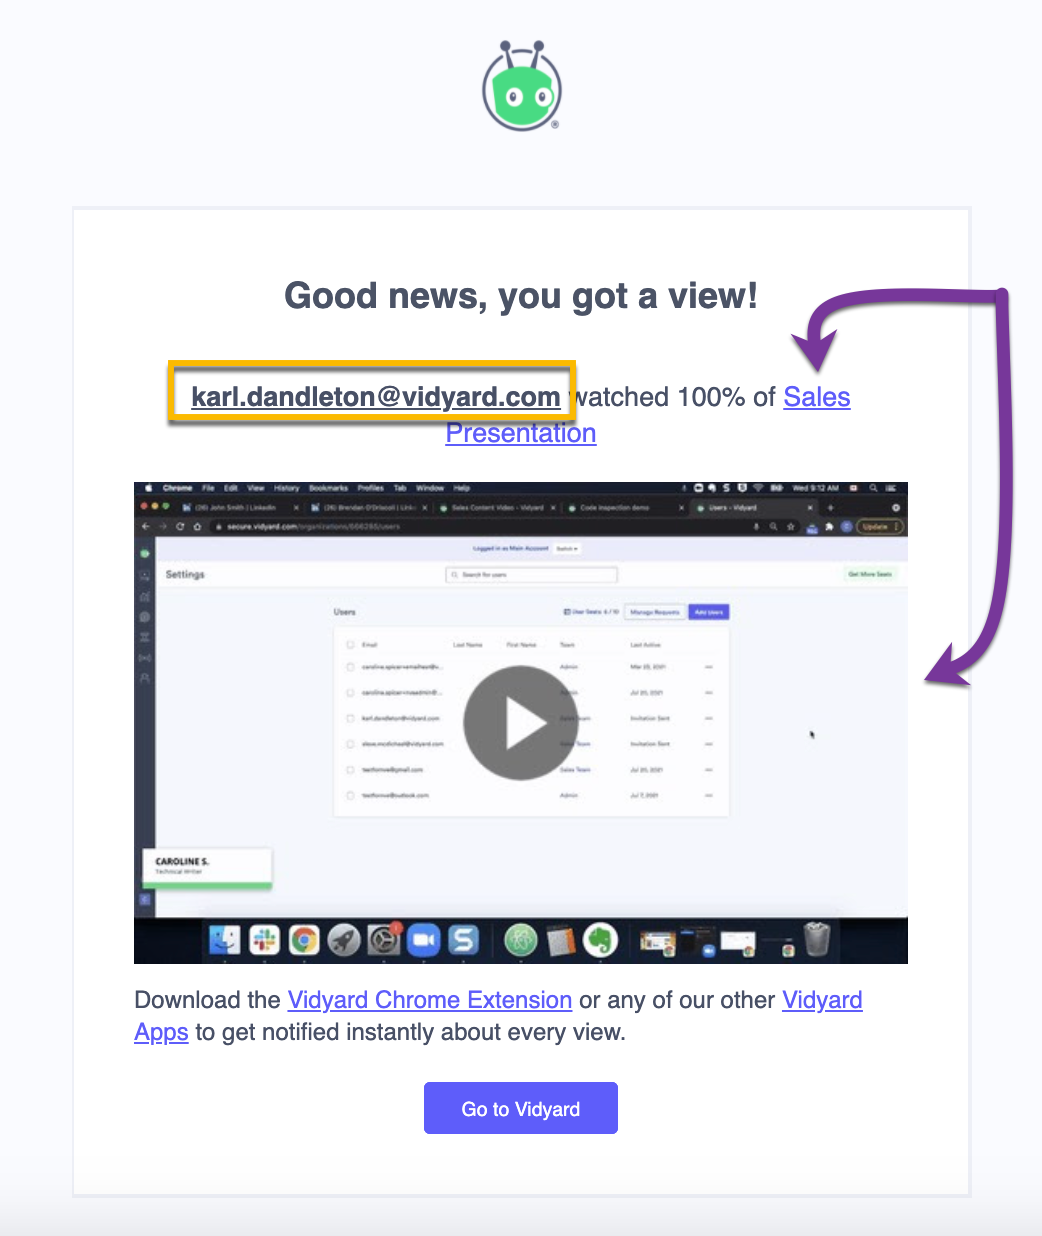 Email view notification from Vidyard showing viewer, video viewed, and percentage watched